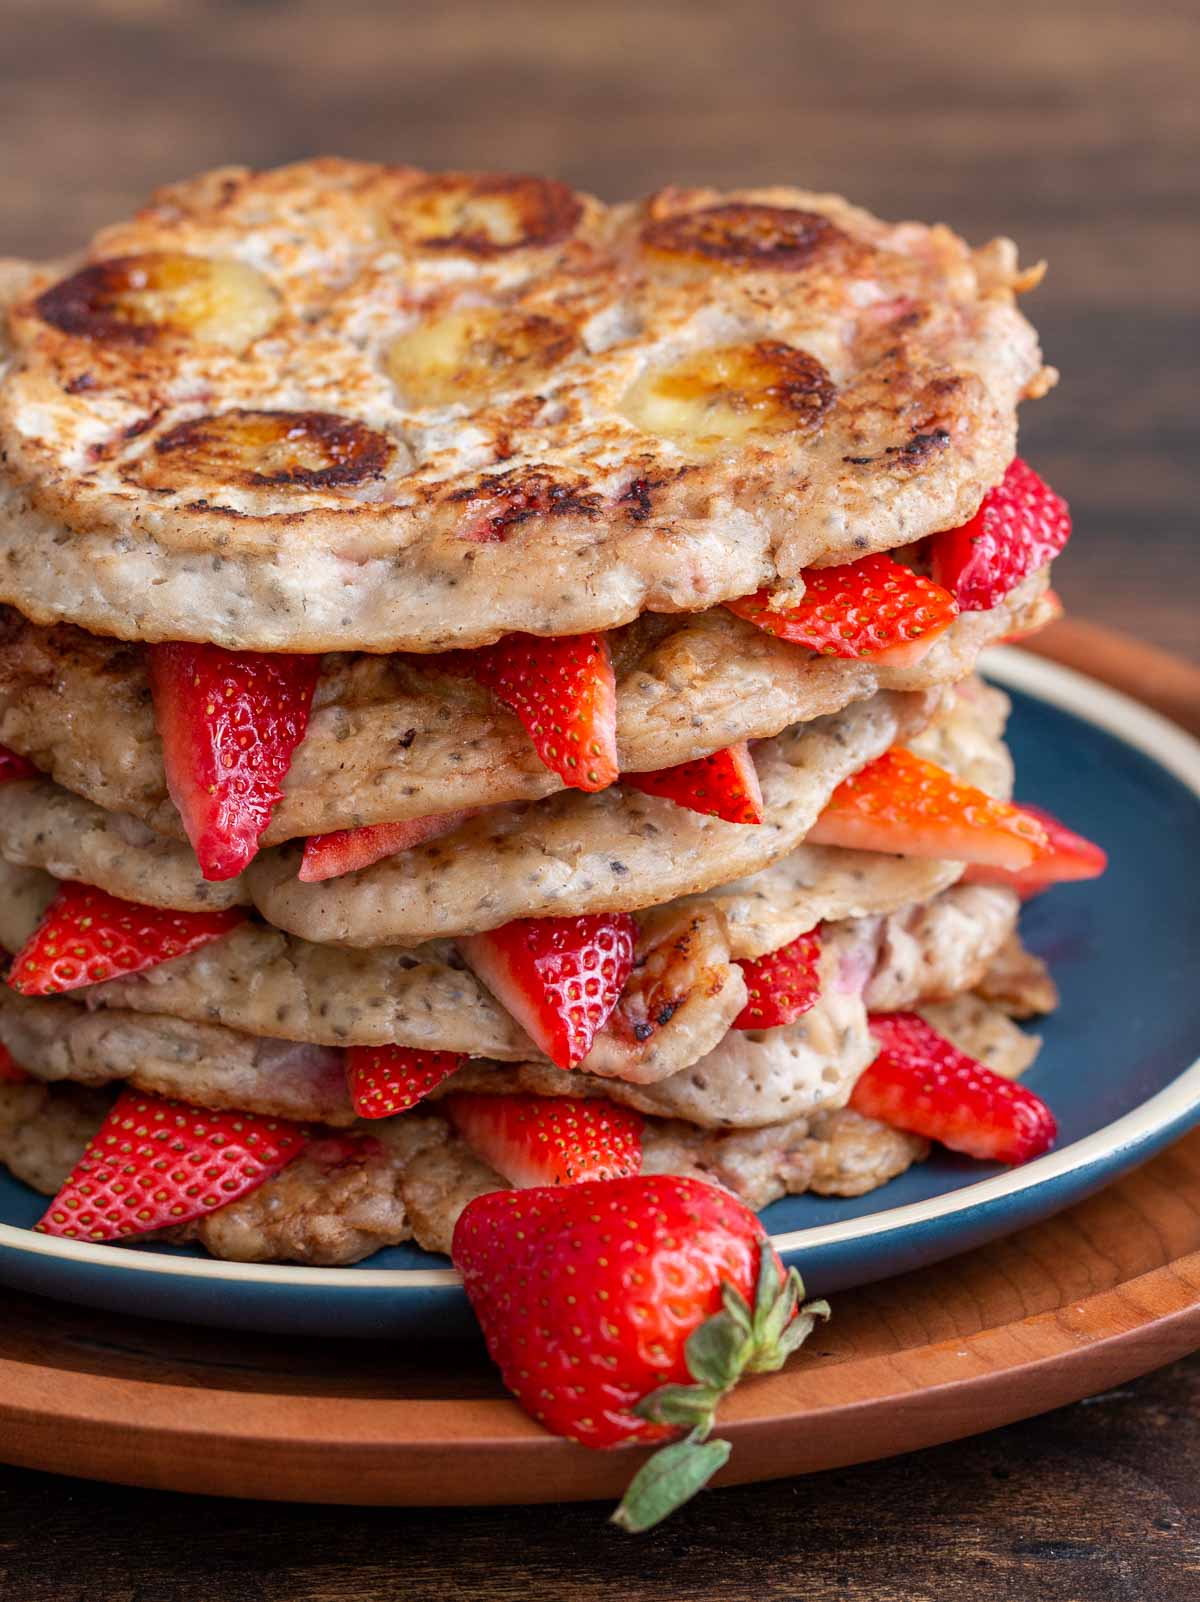 Stack of pancakes showing the caramelized banana slices.